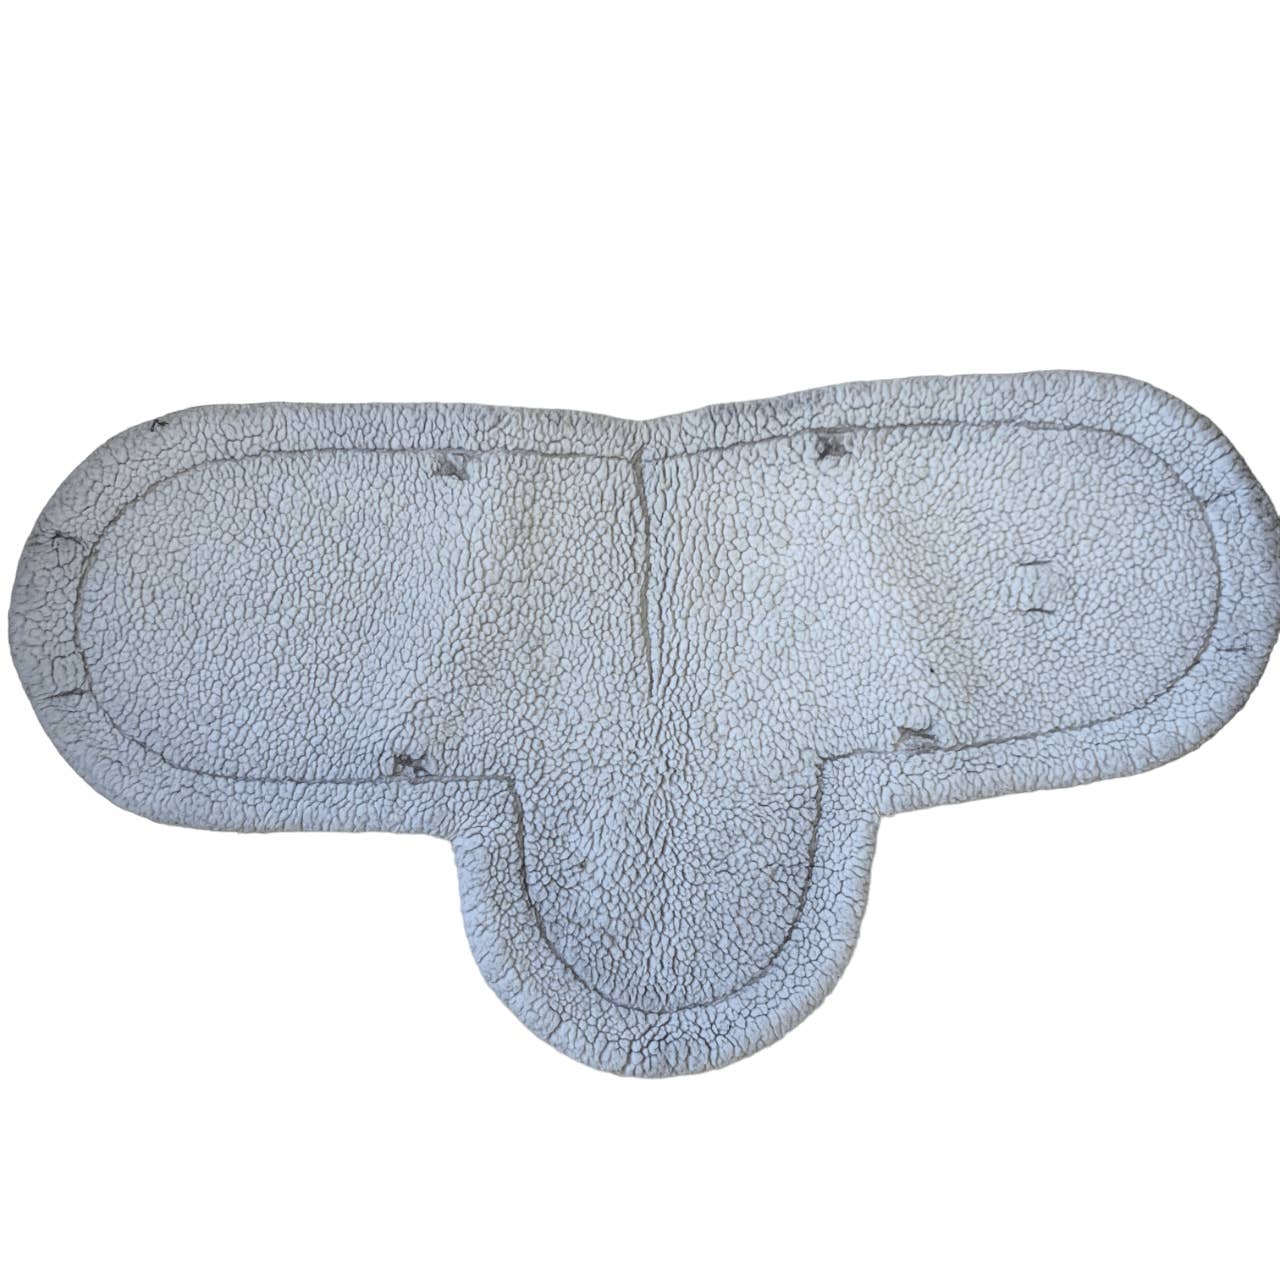 Toklat 'SuperQuilt High Profile' Dressage Pad in White - Full